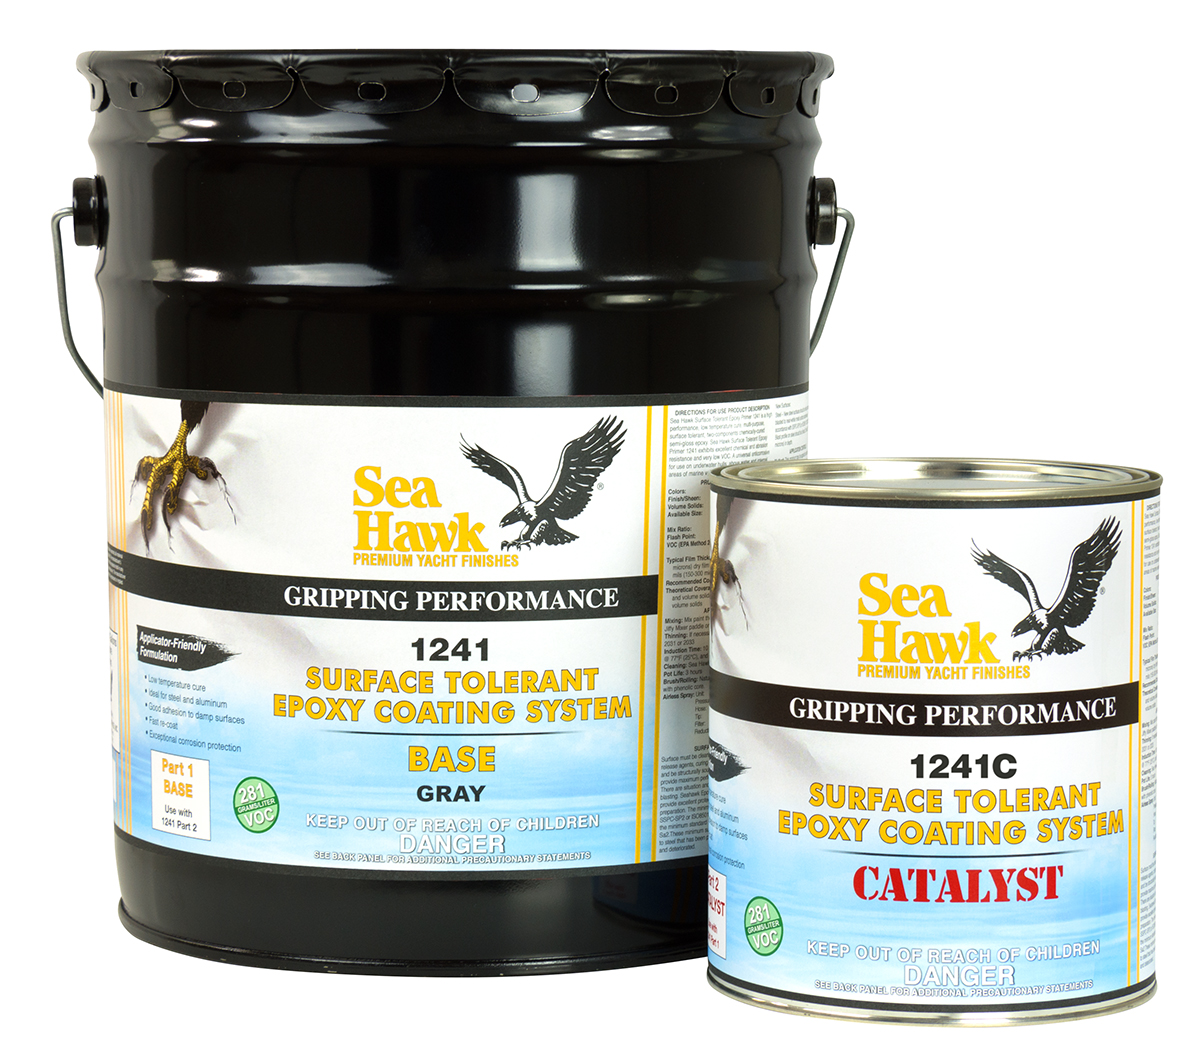 Sea Hawk's 1241 Surface Tolerant Epoxy Coating System is a multi-purpose, surface tolerant, two-part epoxy coating system